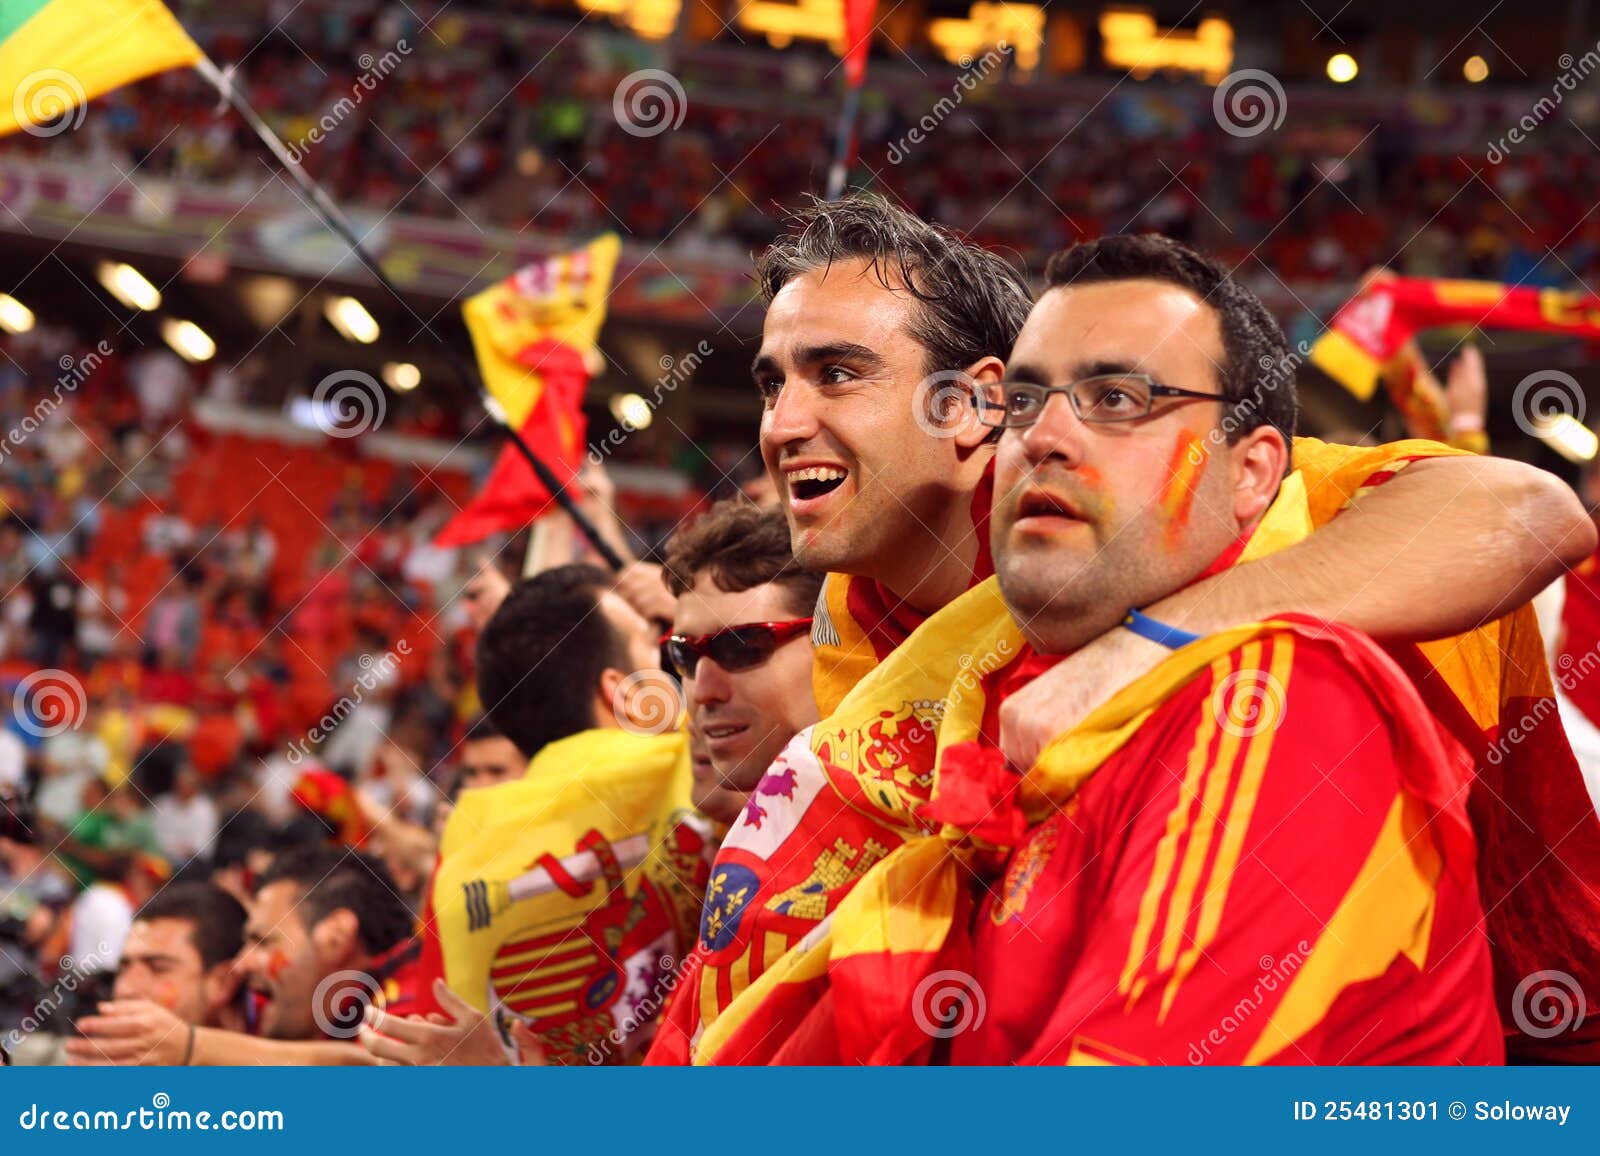 Group of Spanish Football Fans Editorial Photo - Image of expression ...